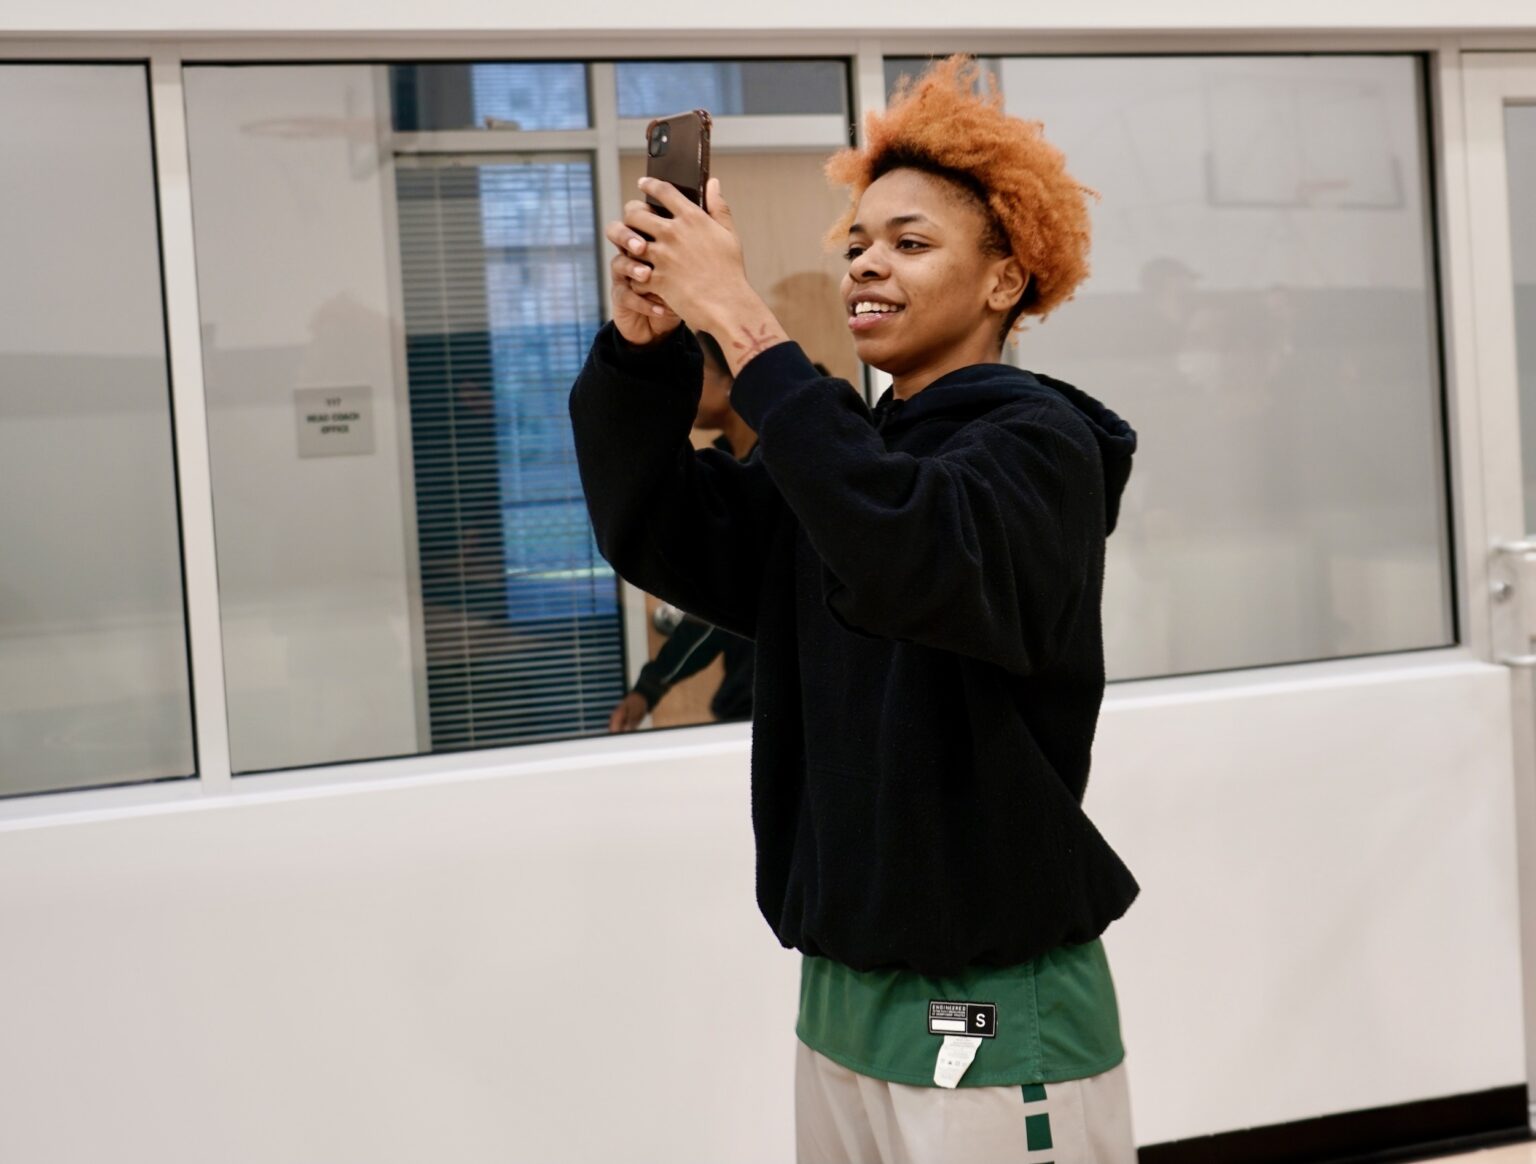 women's basketball player takes photos of the basketball performance center